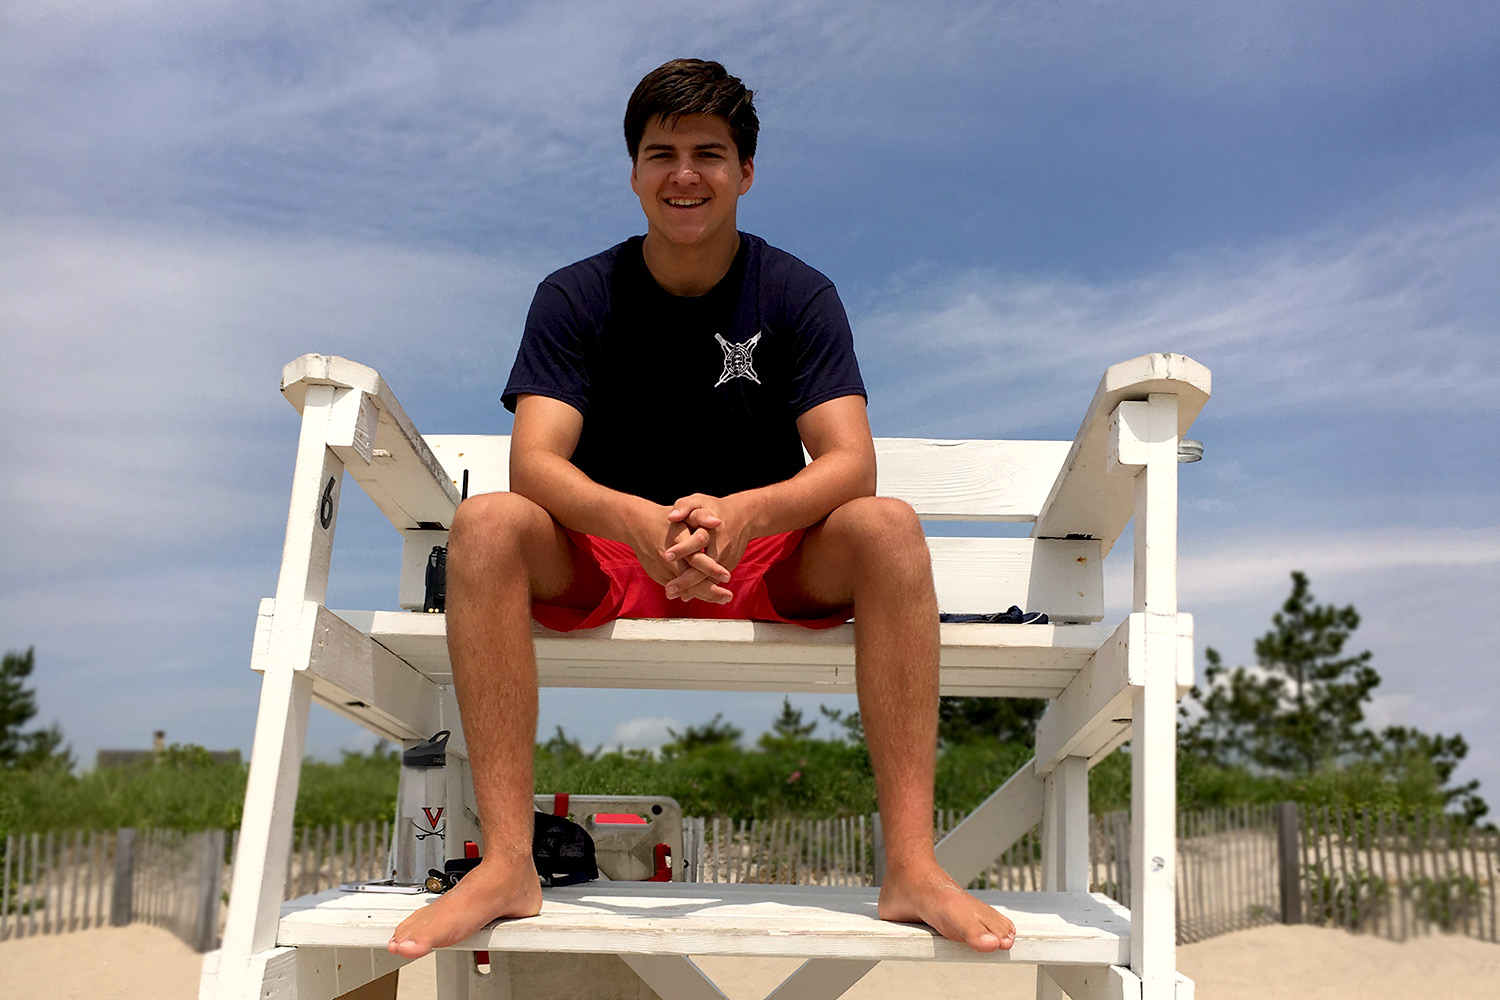 David Darling sitting in a lifeguard stand on a beach working